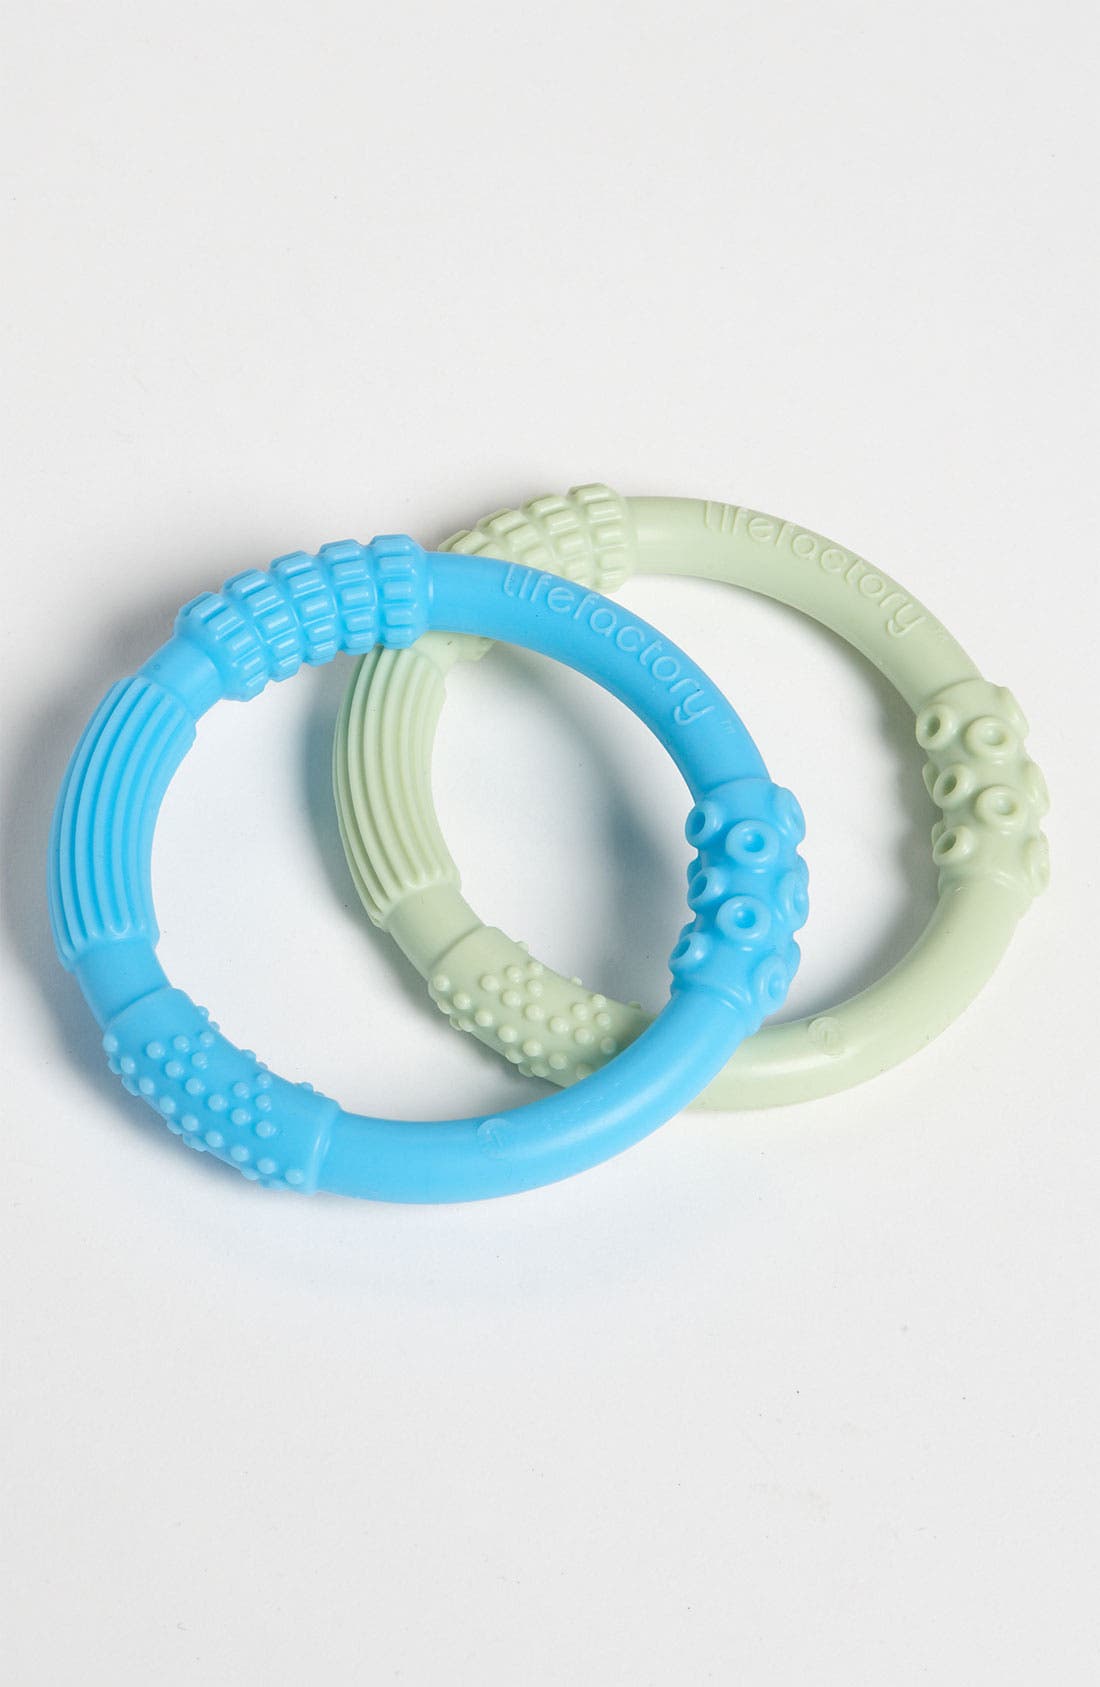 lifefactory silicone teether